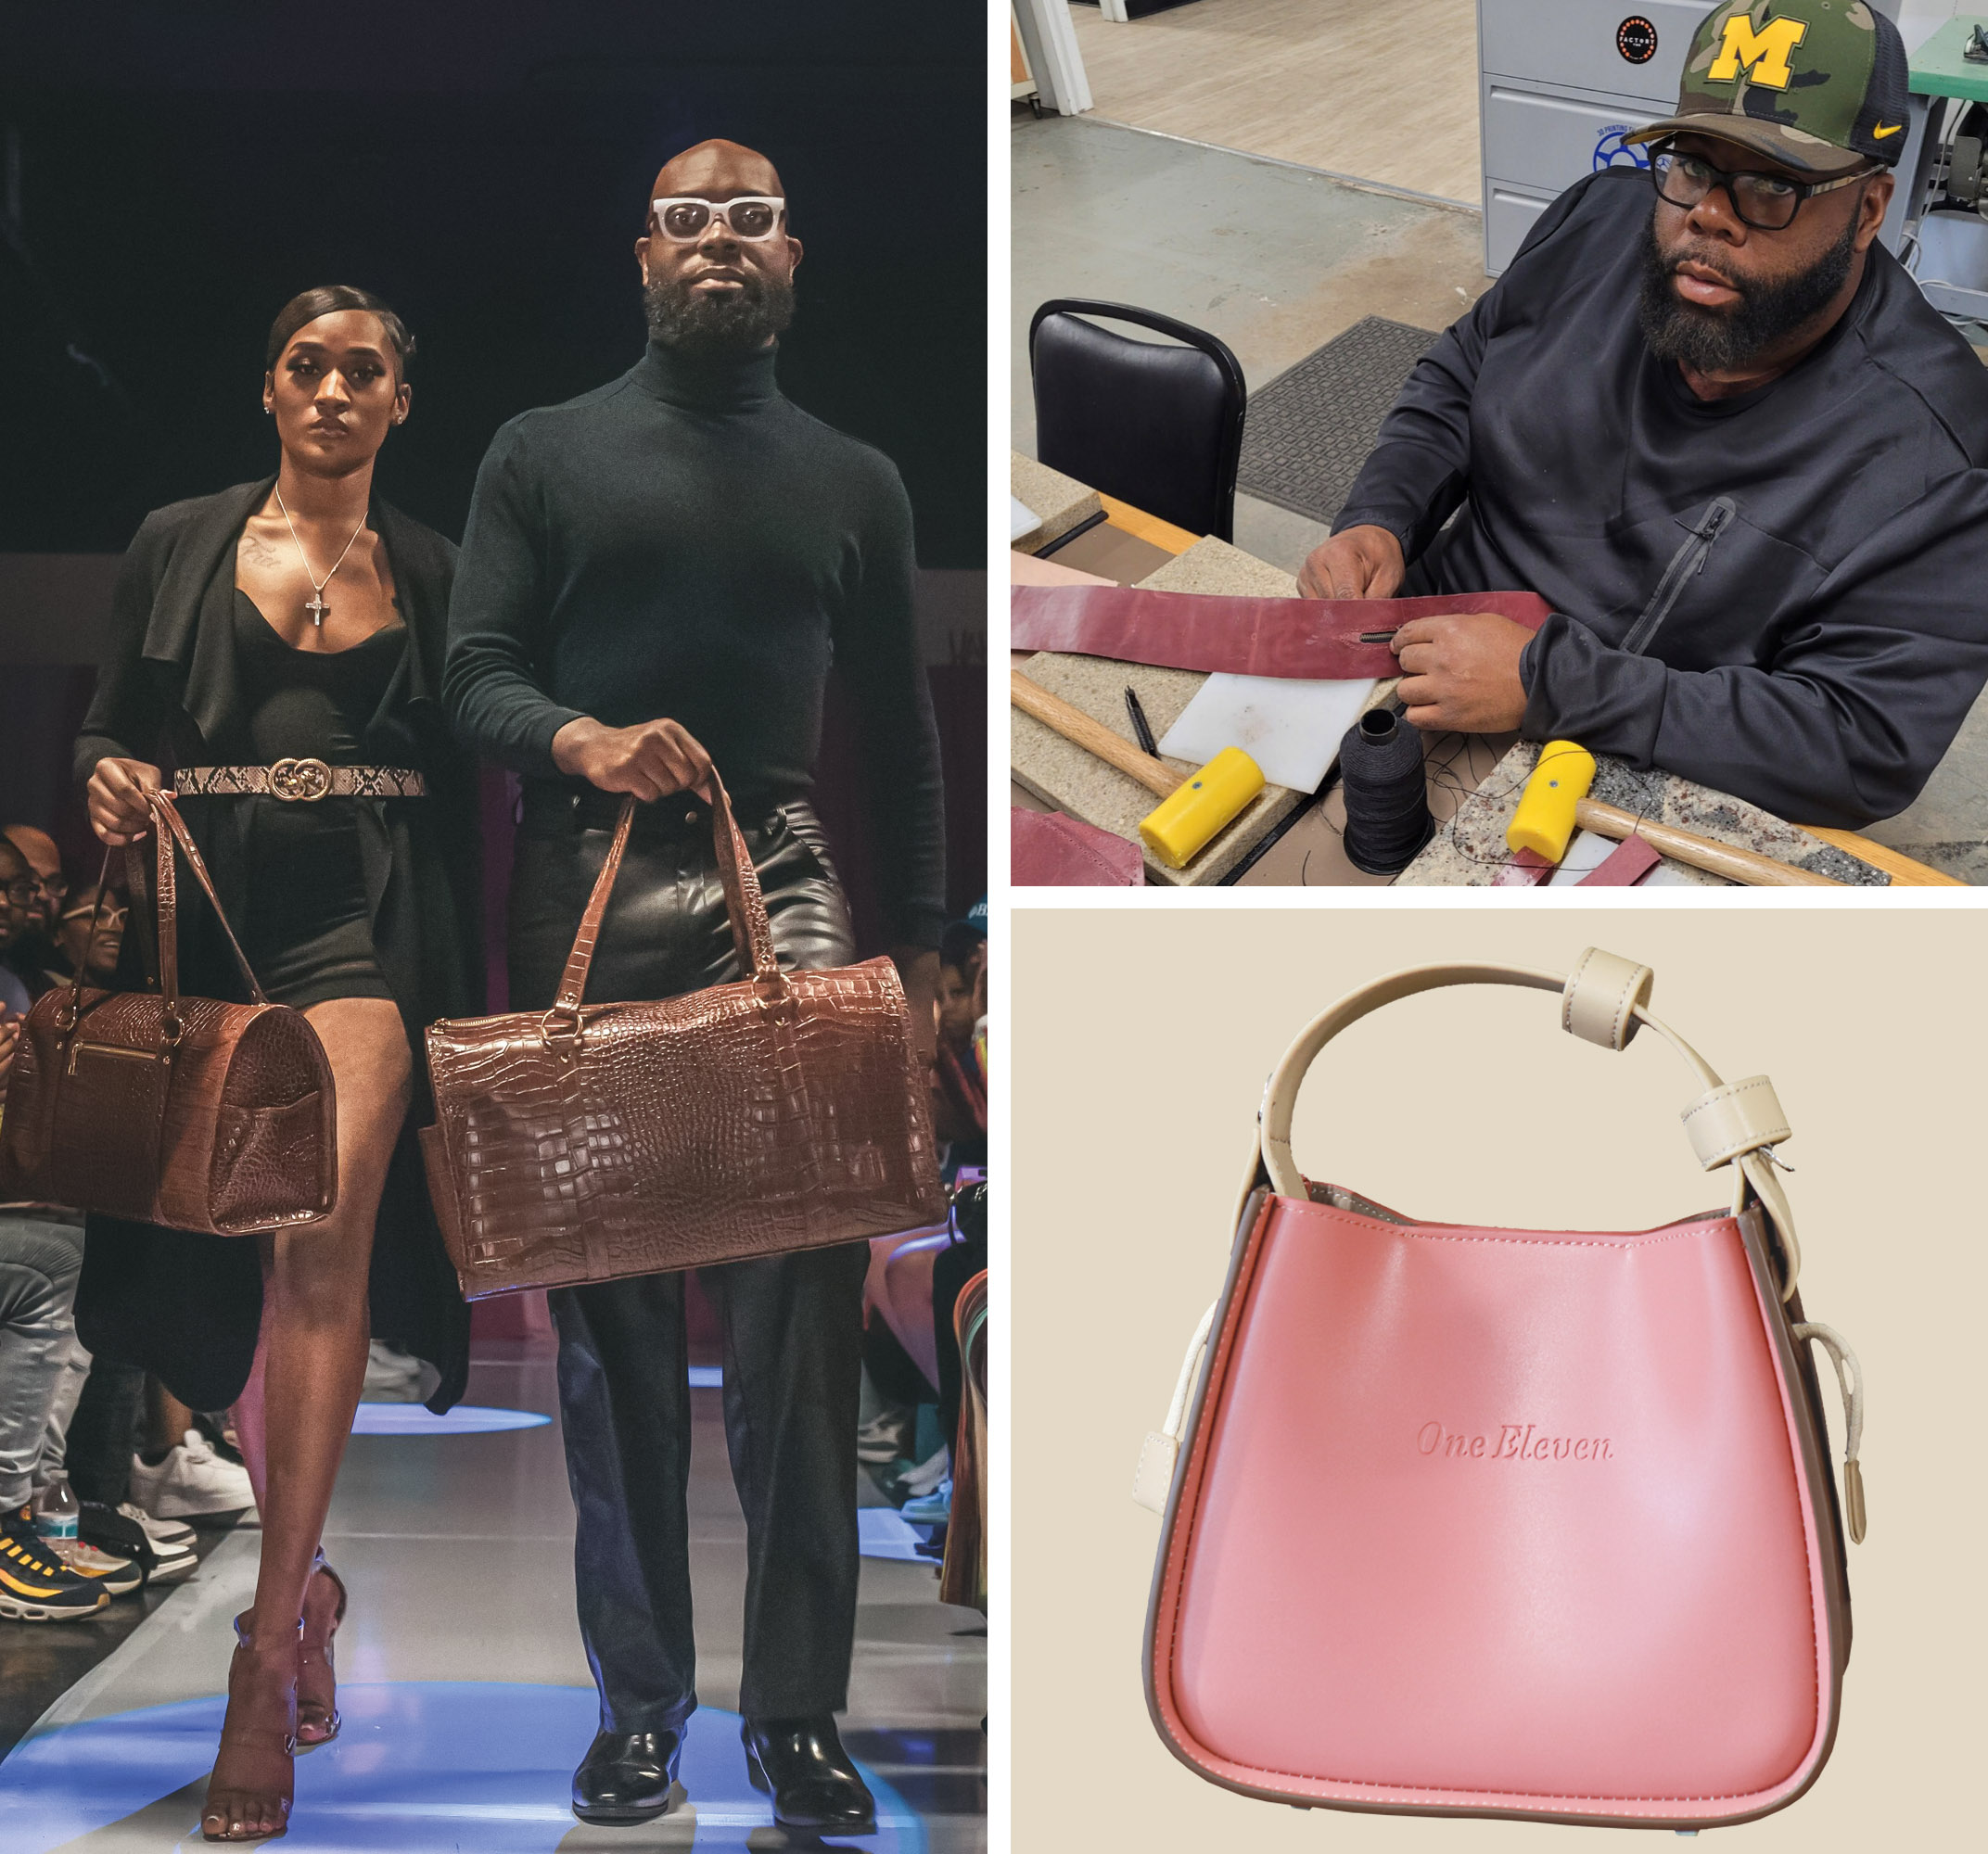 A female and male model walk a fashion show runway each holding a 1:Eleven leather carry-on and duffel bag. Inset photo is Miracle McGlown at his worktable cutting pieces of leather for his next leather bag.